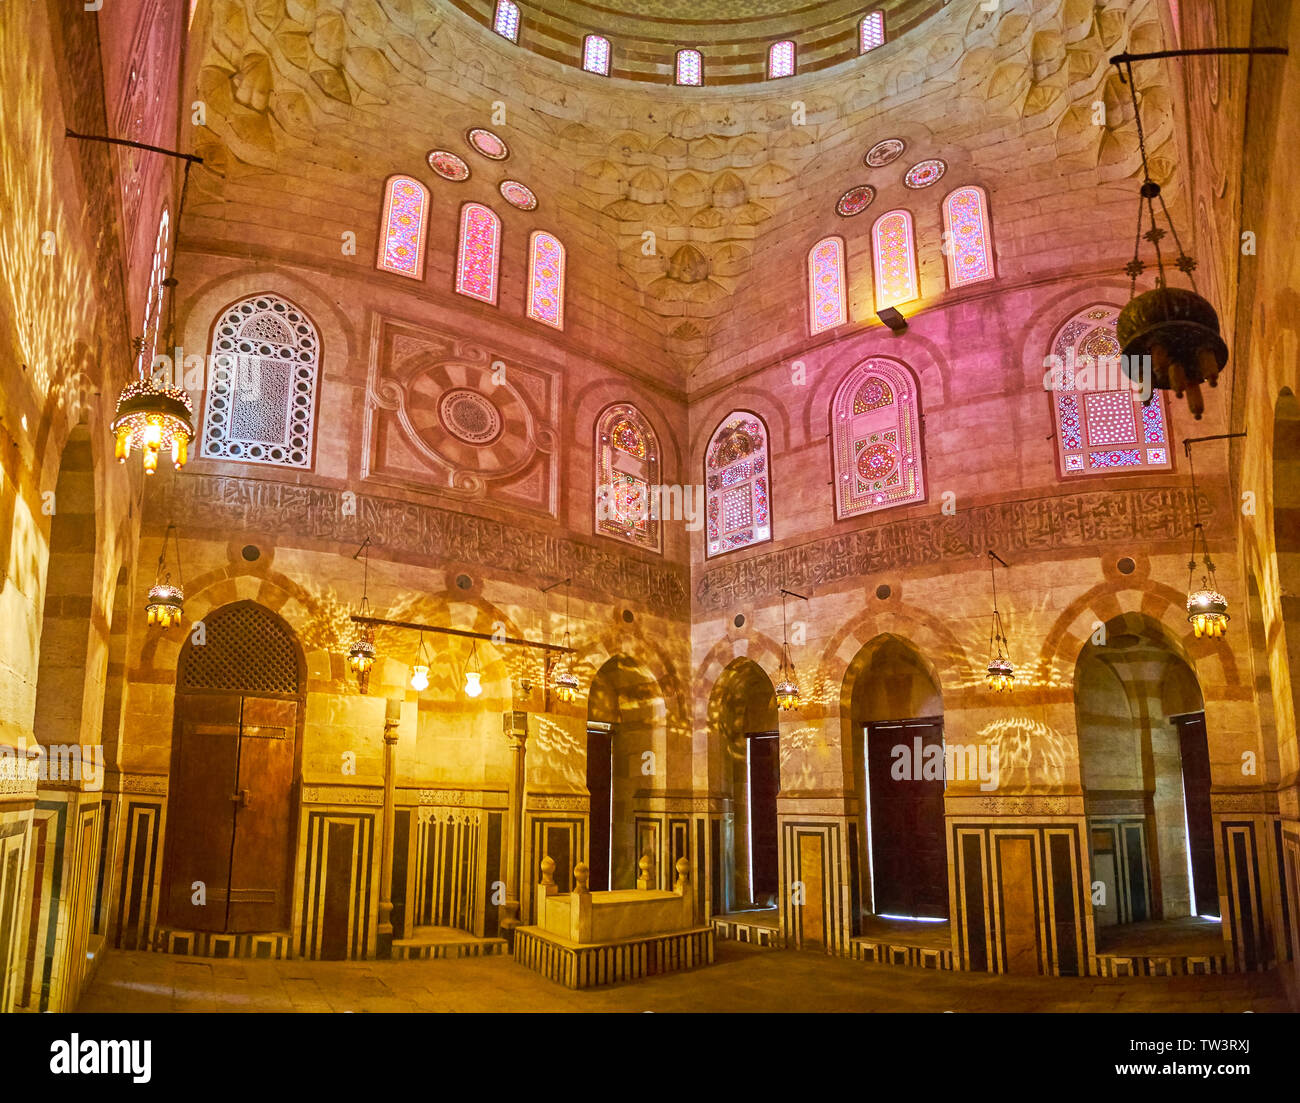 CAIRO, EGYPT - DECEMBER 22, 2017: The scenic medieval building of Amir Khayrbak Mausoleum with carved walls, covered with colorful shades of stained g Stock Photo